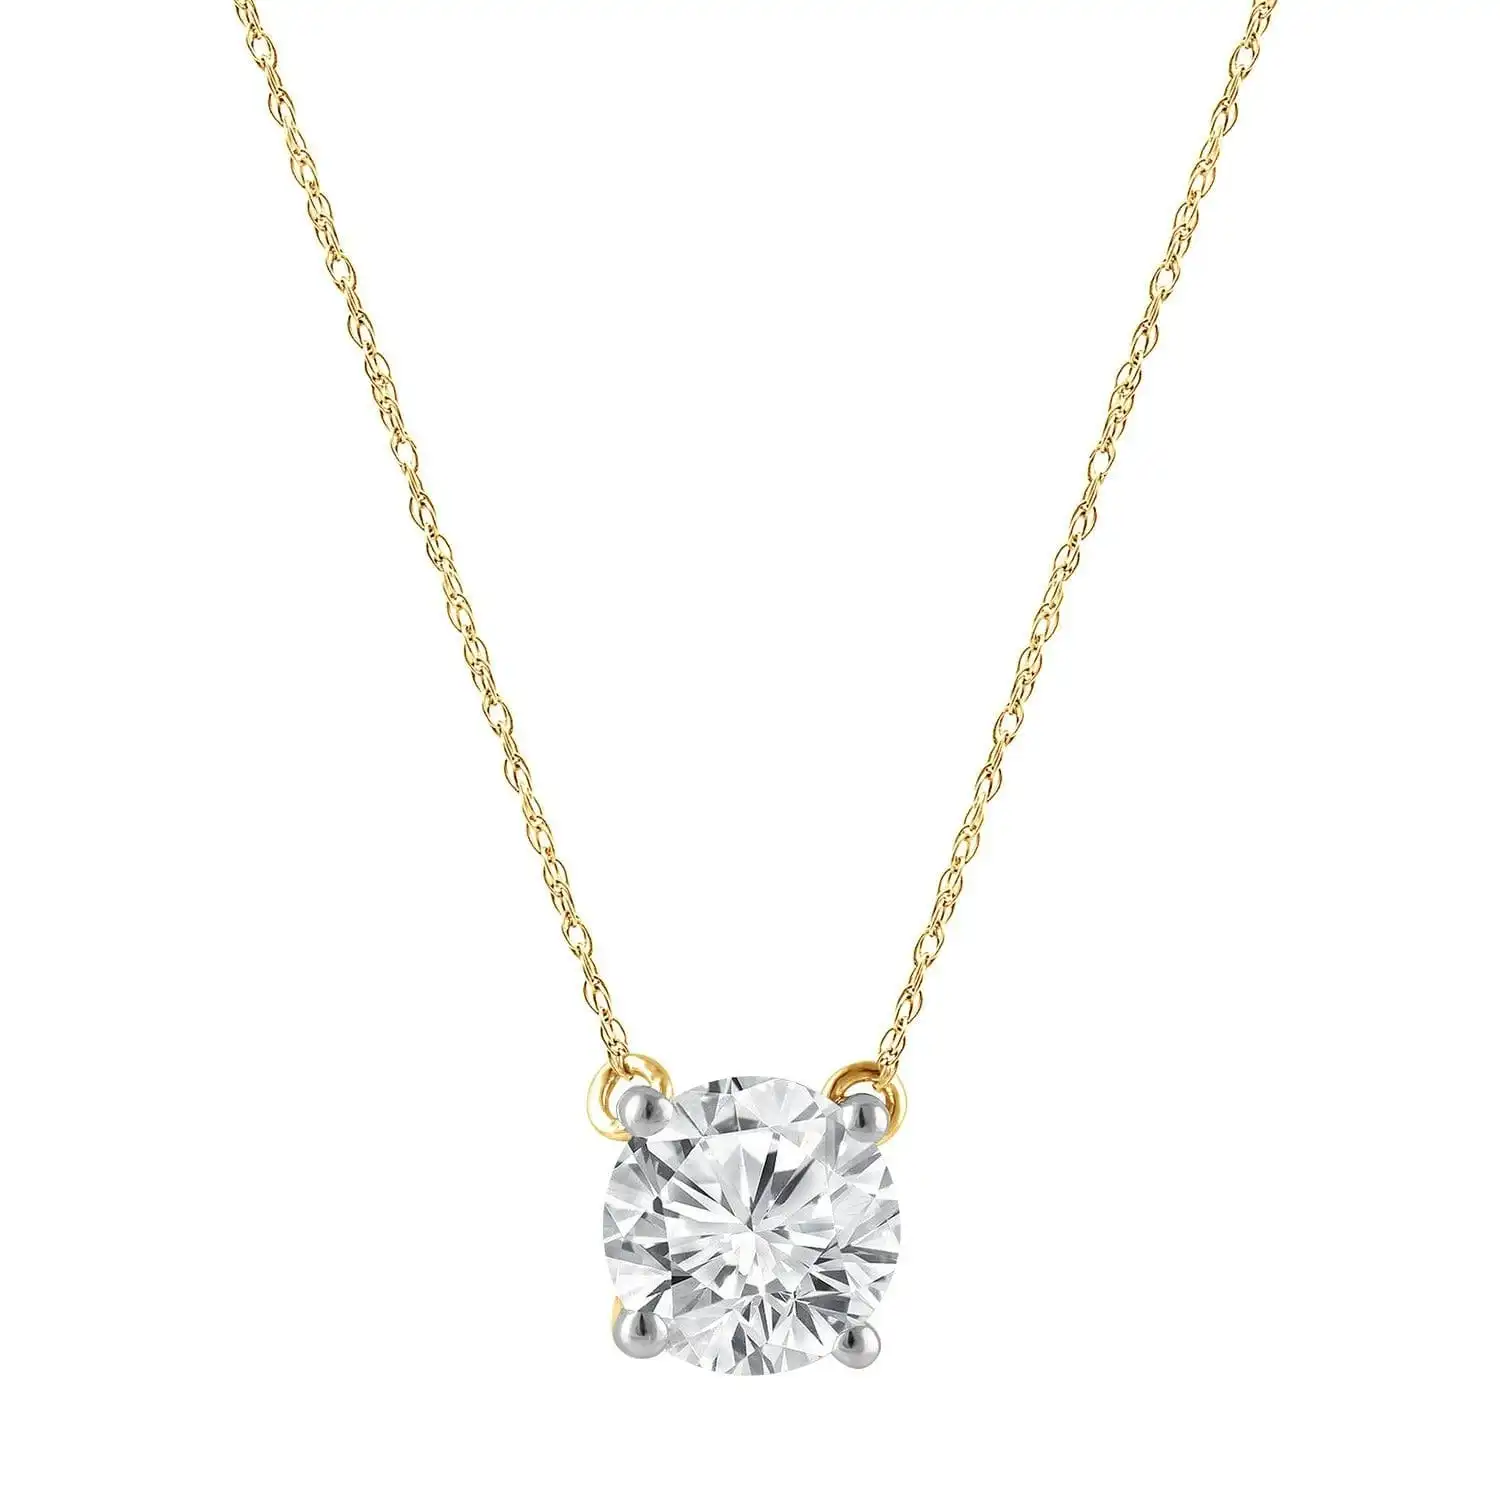 Meera 1.00ct Laboratory Grown Solitaire Diamond Necklace in 9ct Yellow Gold